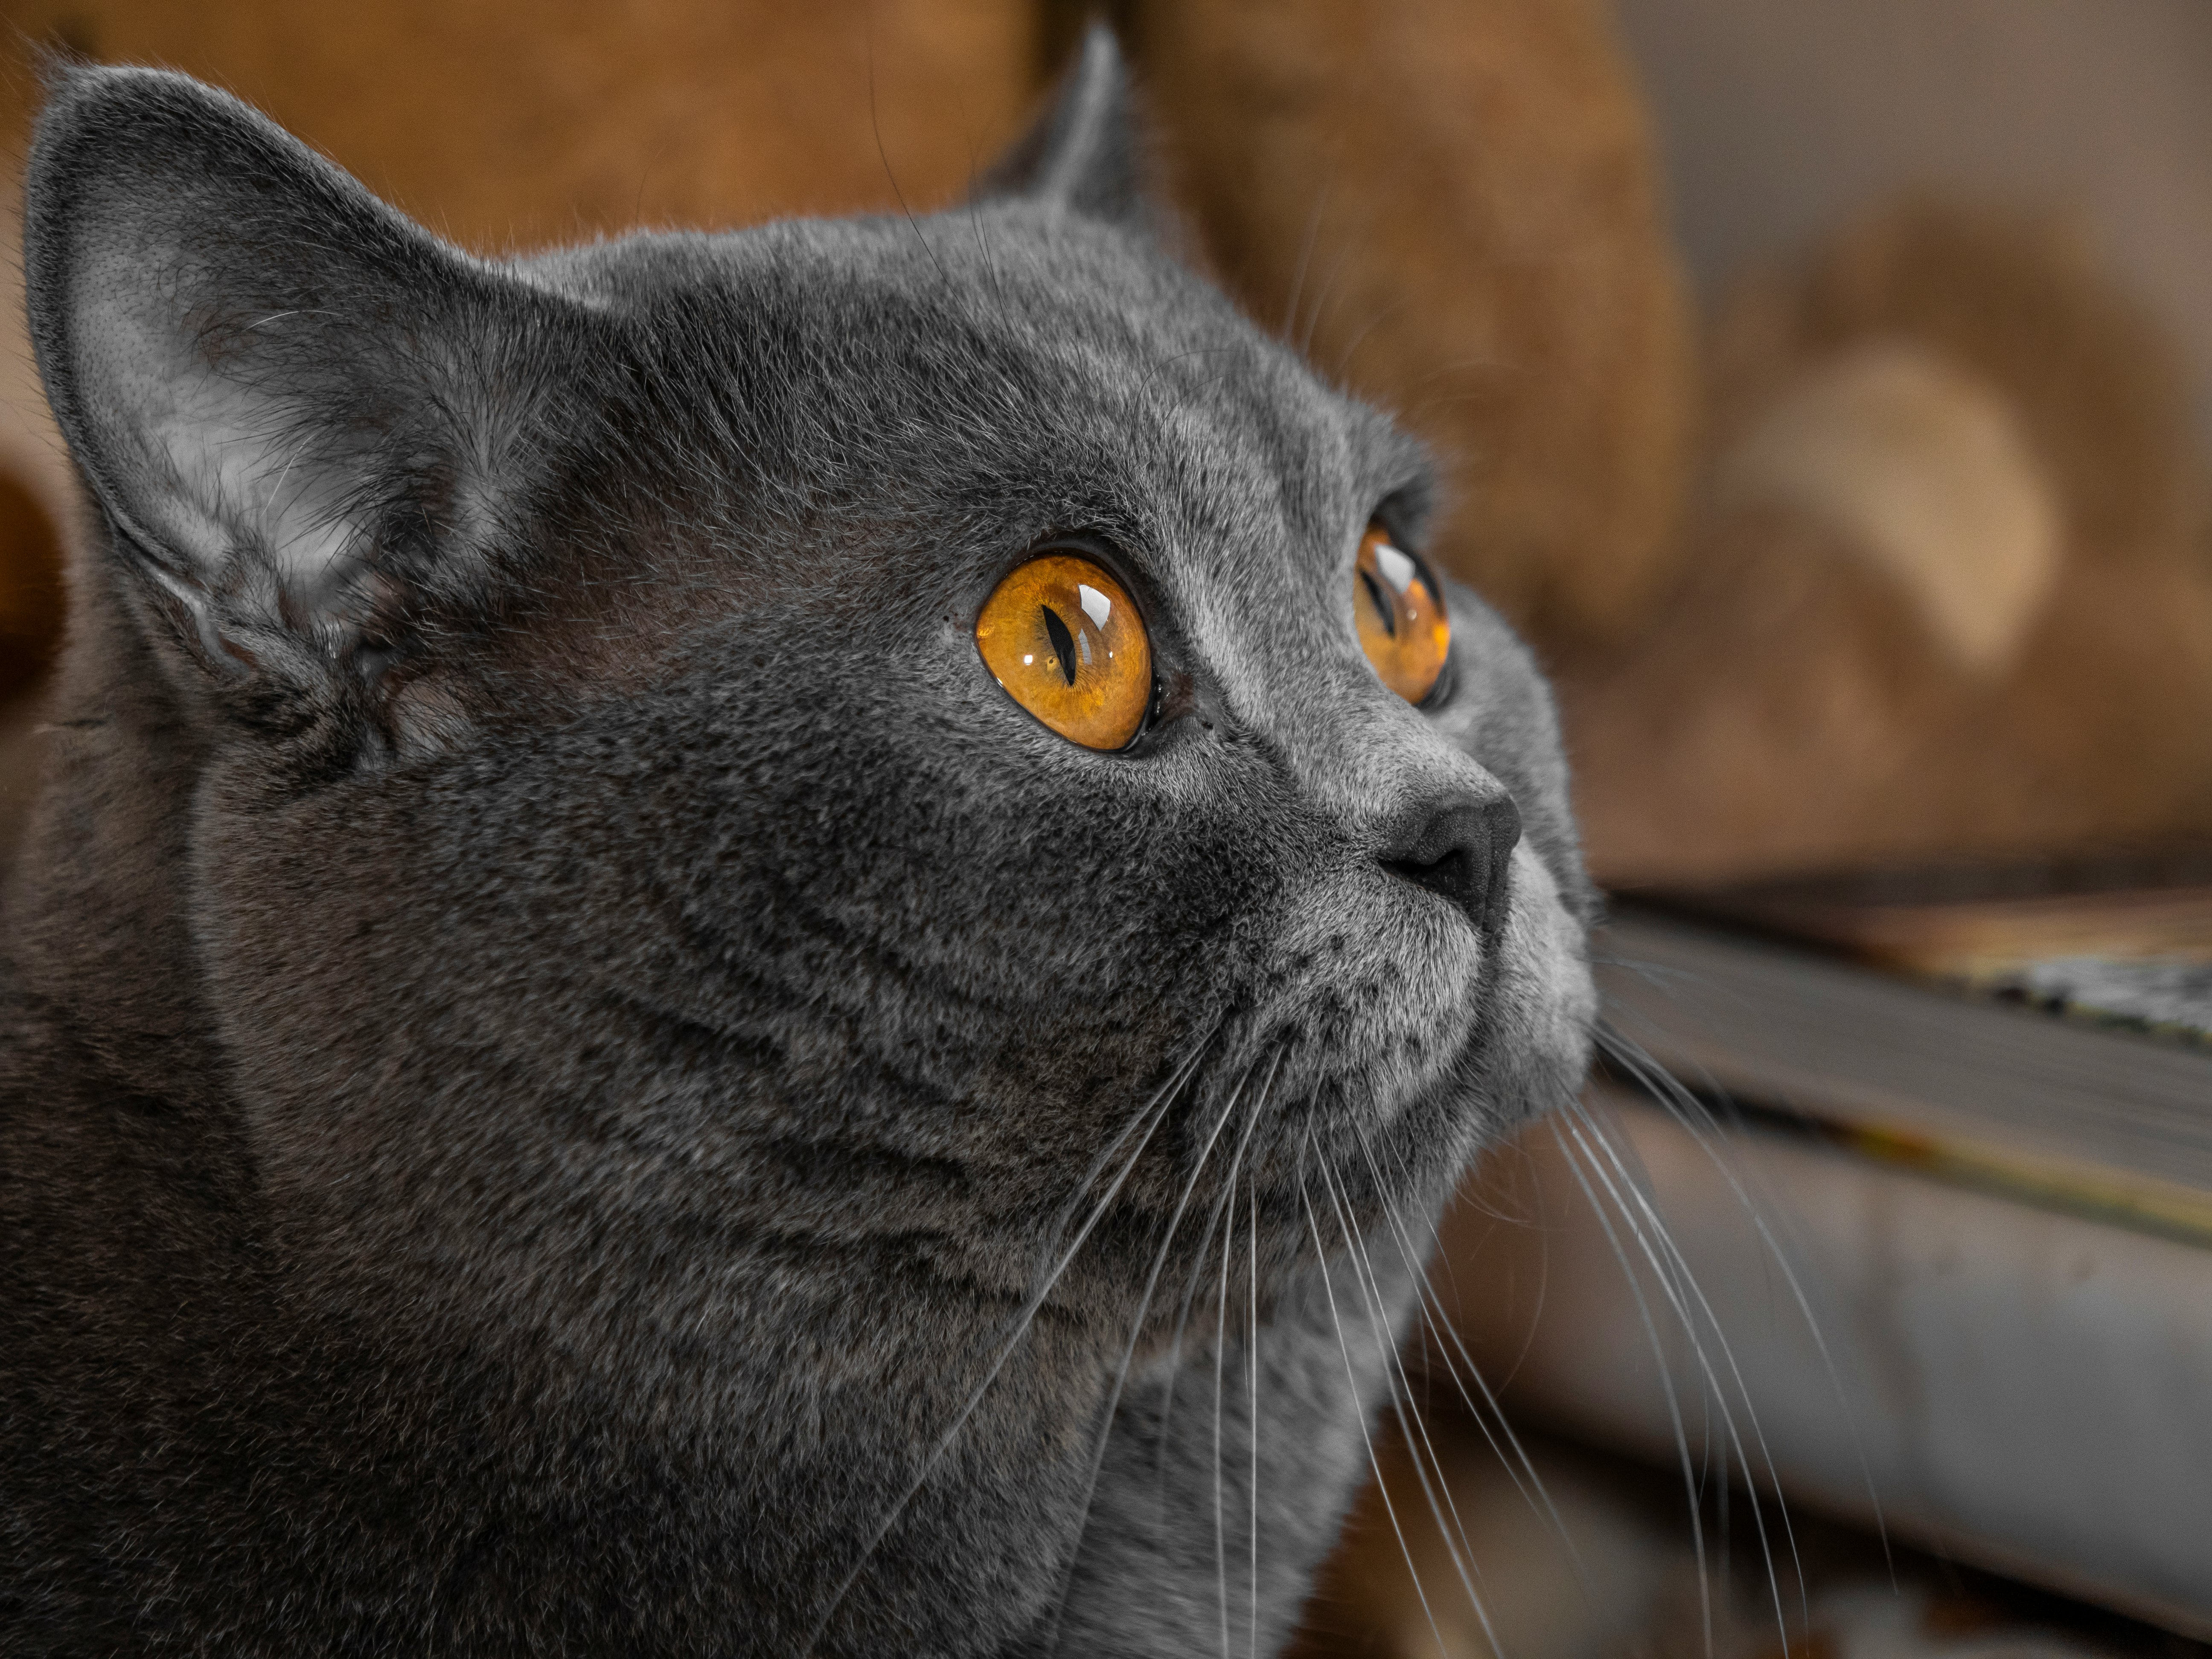 russian blue cat in close up photography